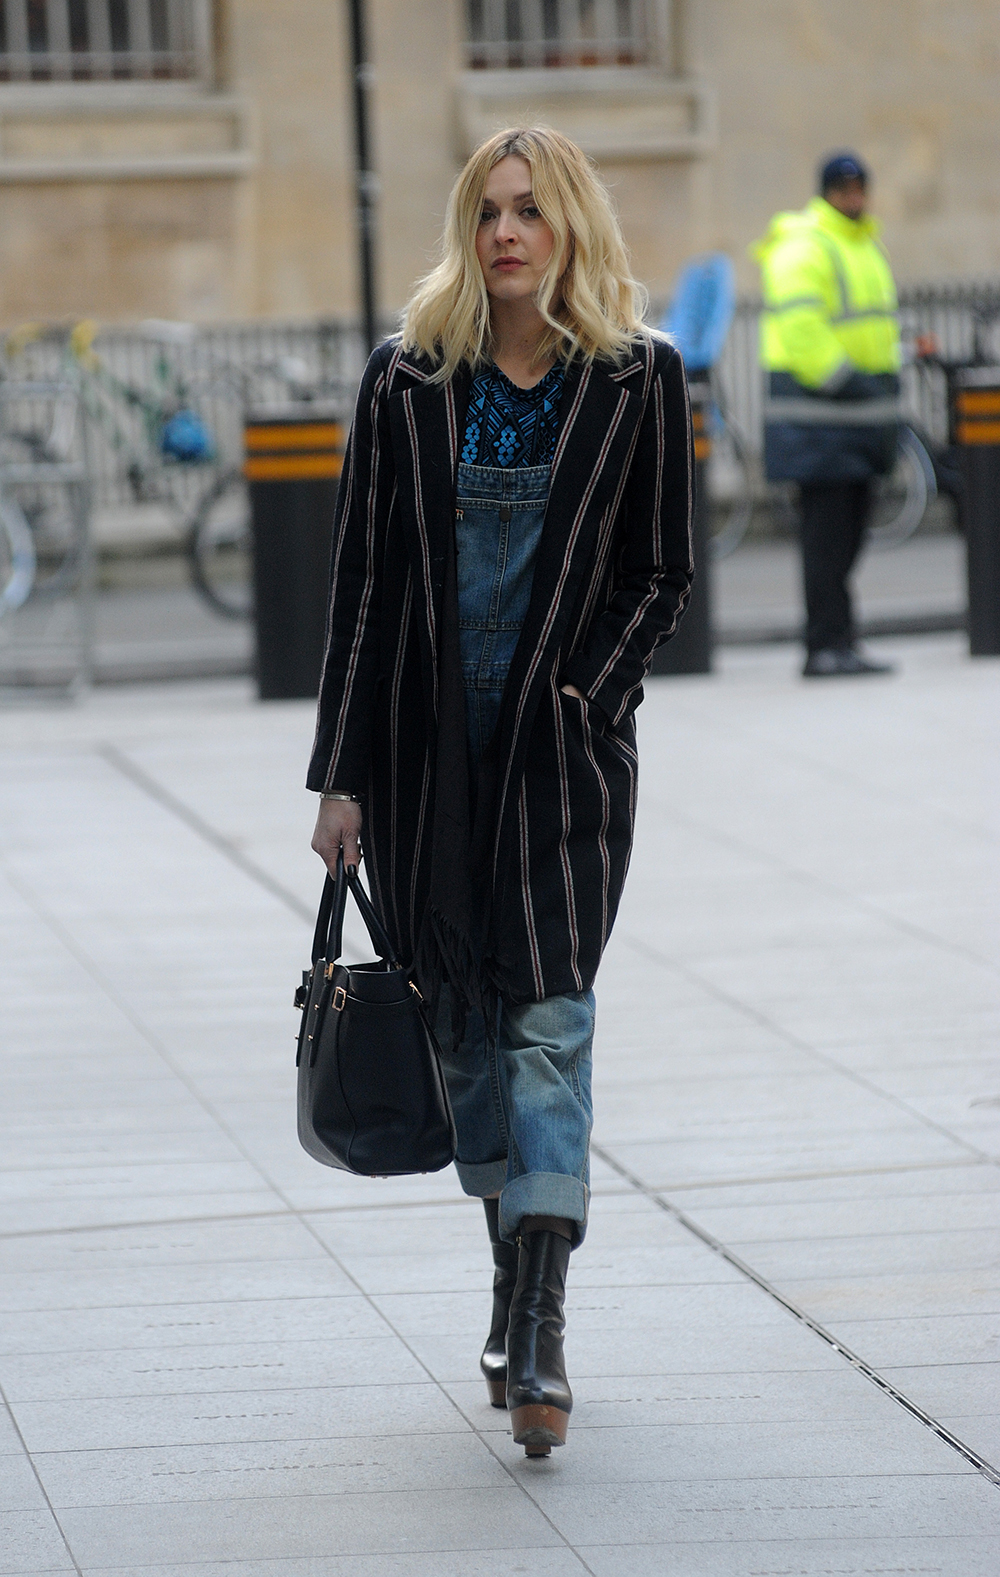 Fearne Cotton goes for some eclectic pattern-on-pattern styling. Photo / Getty Images